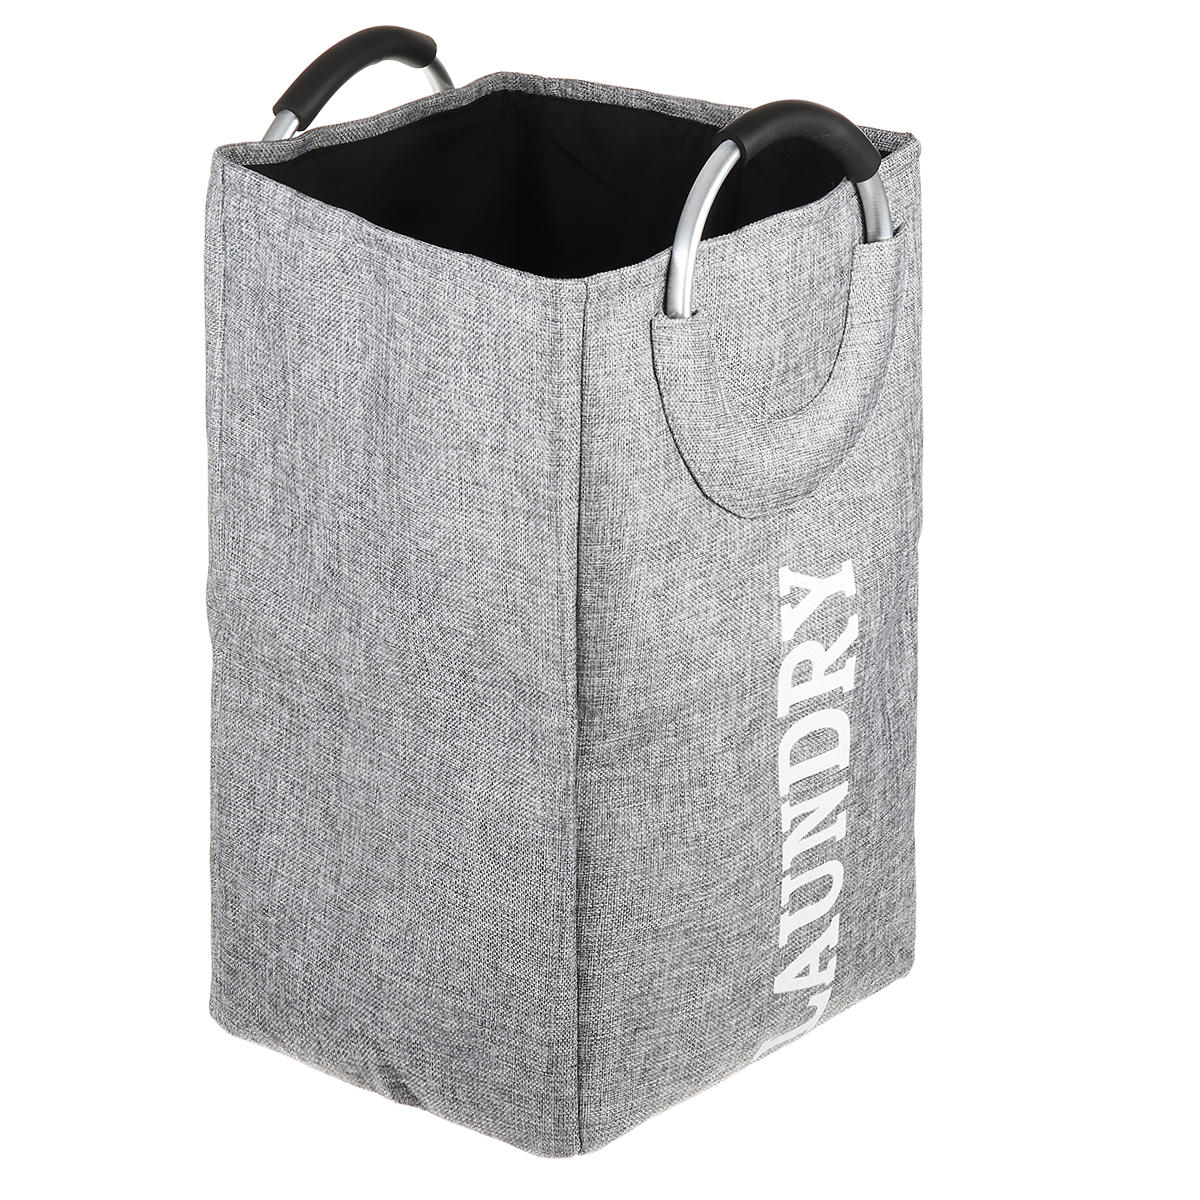 

Portable Foldable Oxford Laundry Washing Dirty Clothes Storage Baskets Bag Hamper